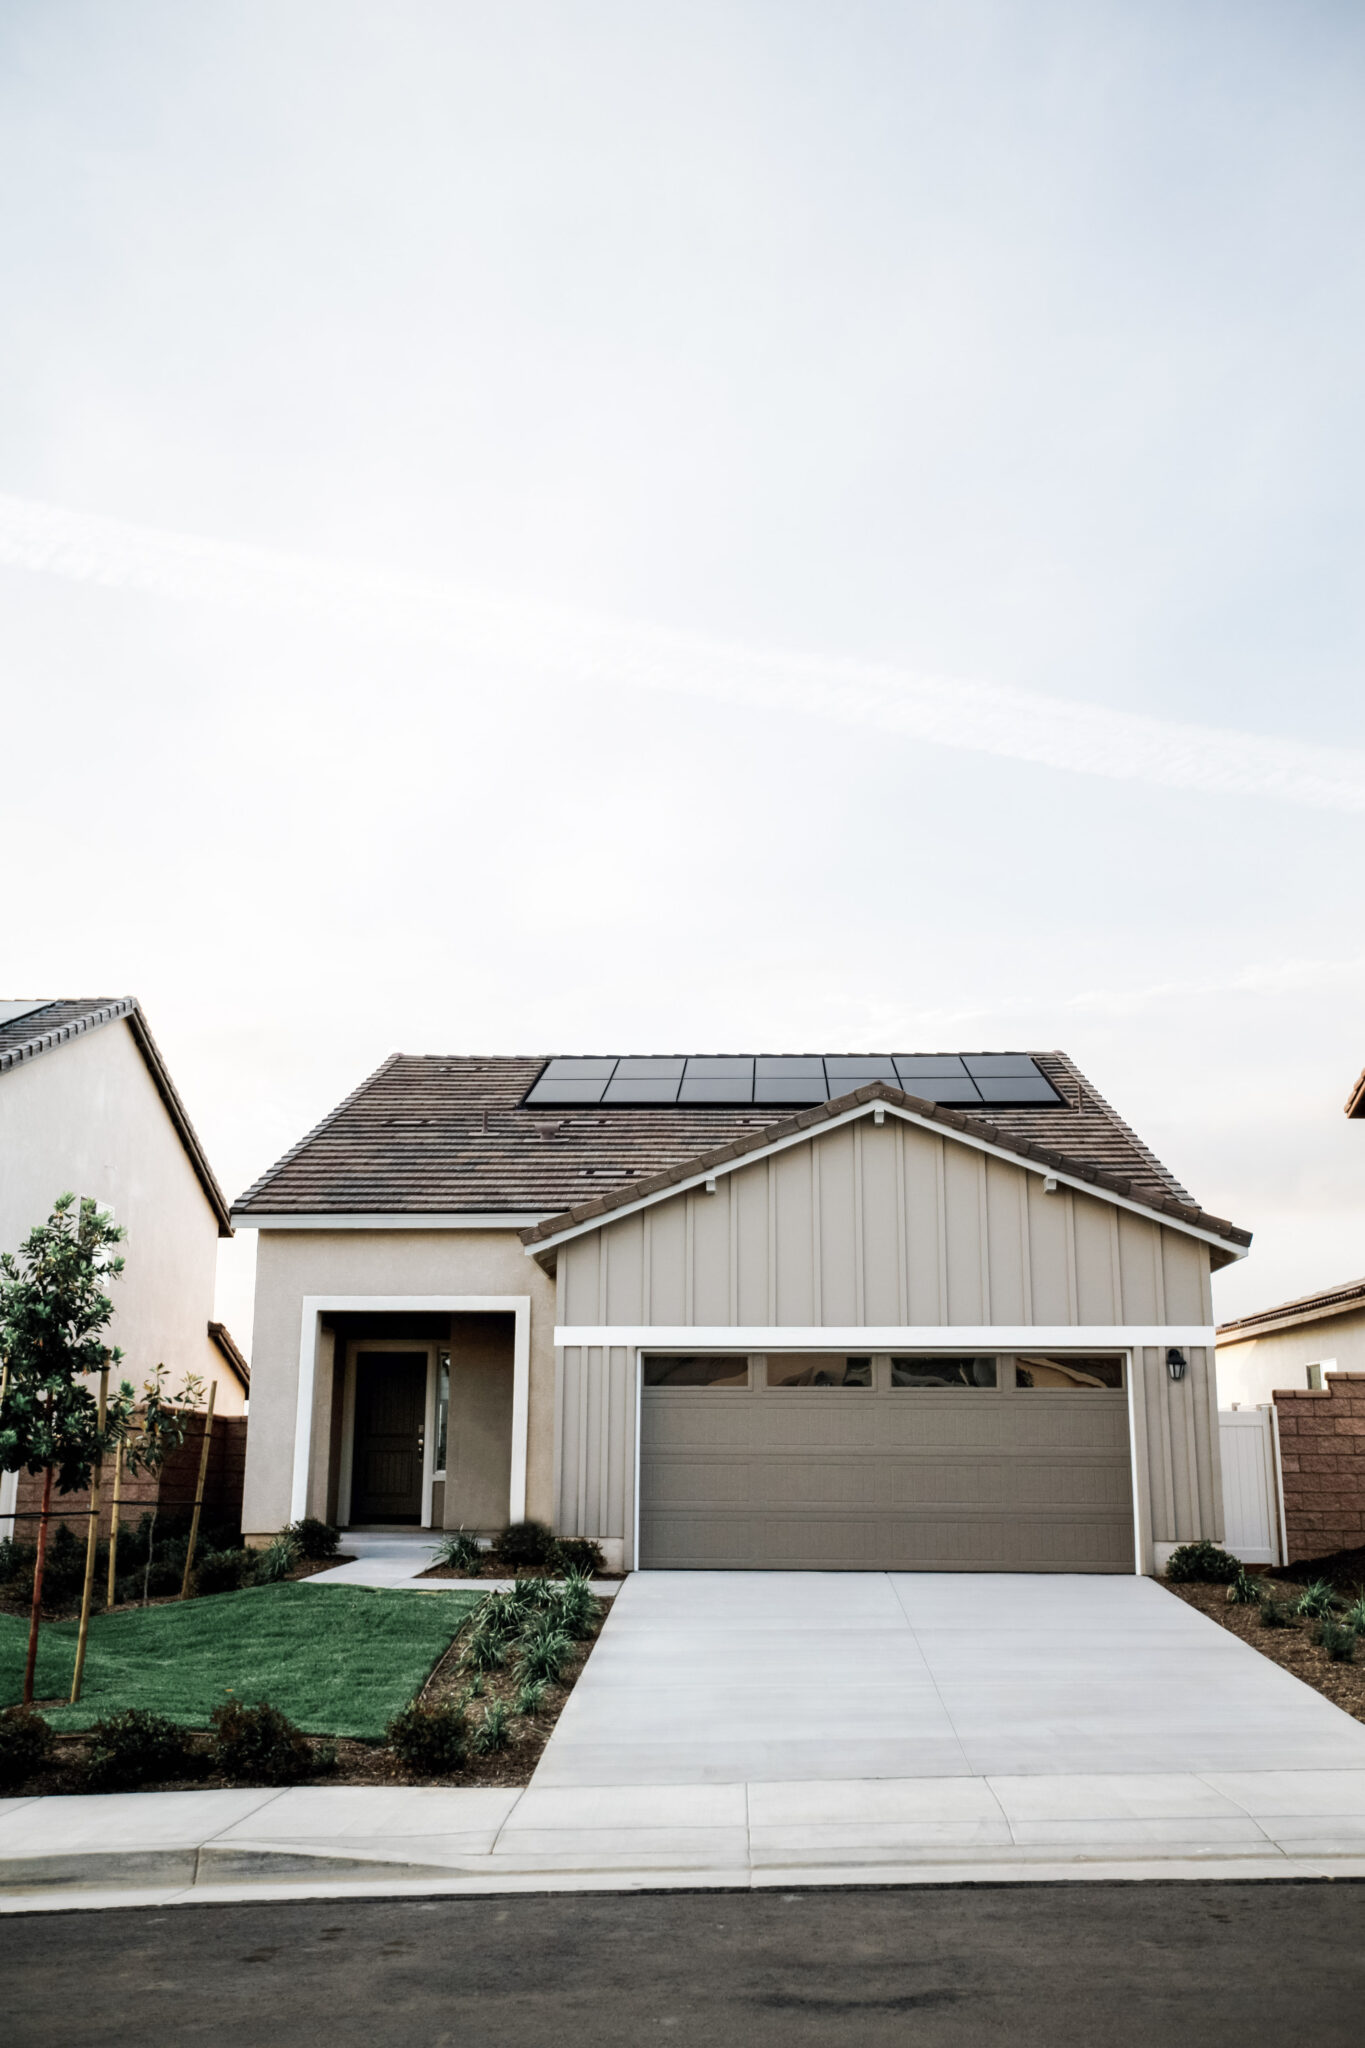 A house with solar panels on the roof is shown. This article covers how to find a reliable supplier for solar panels.